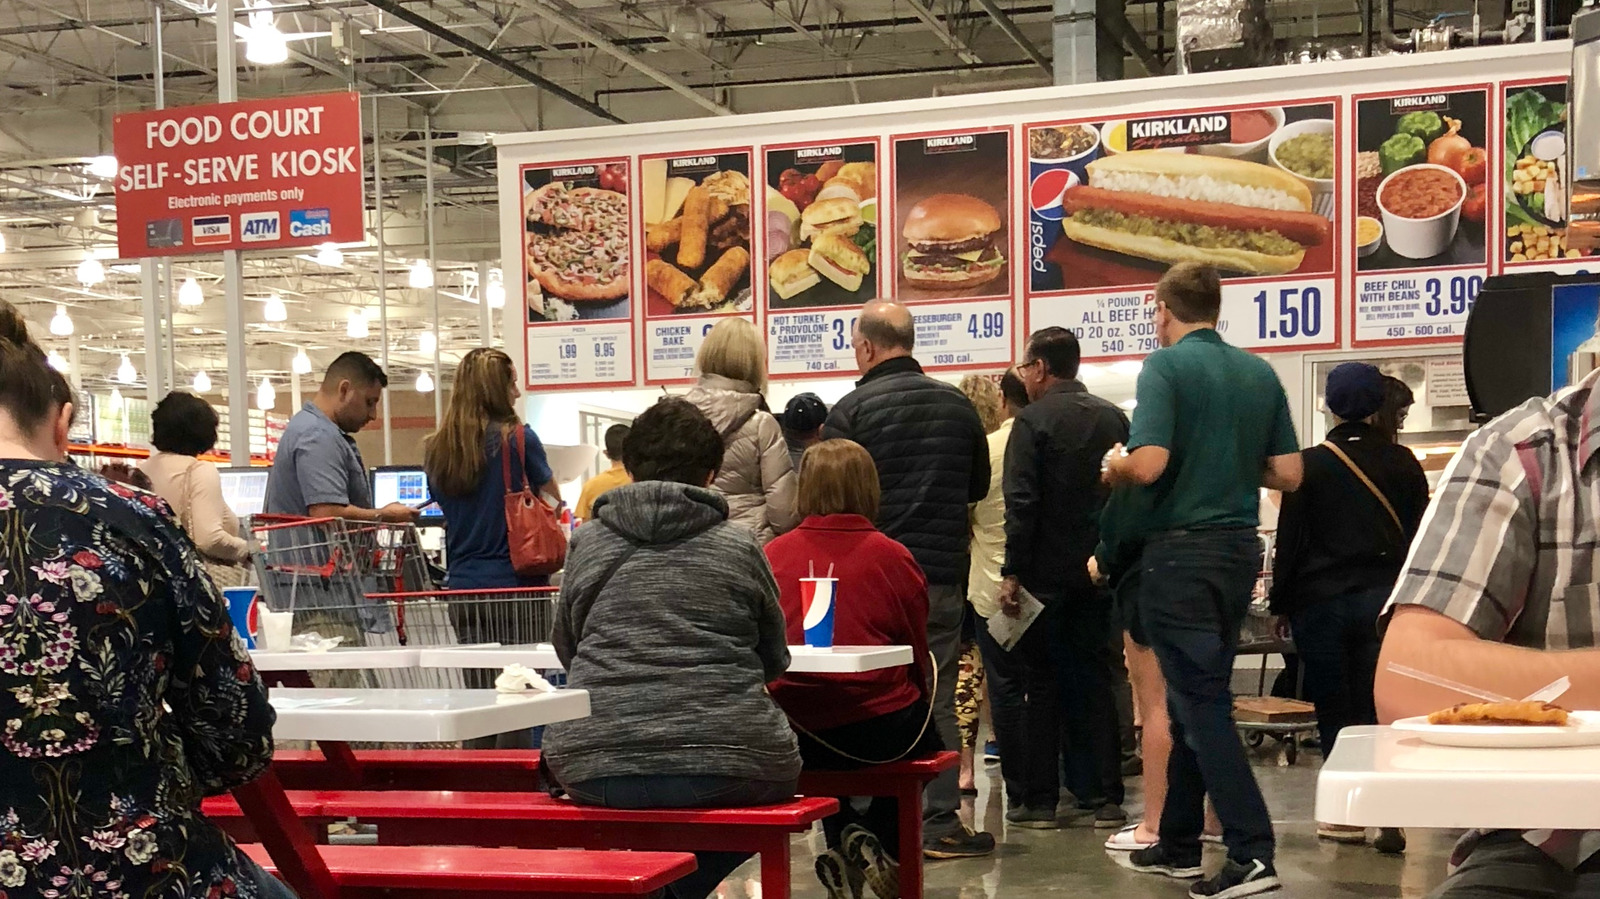 Sam's Club Vs. Costco: Who's Winning The Battle For Best Food Court?